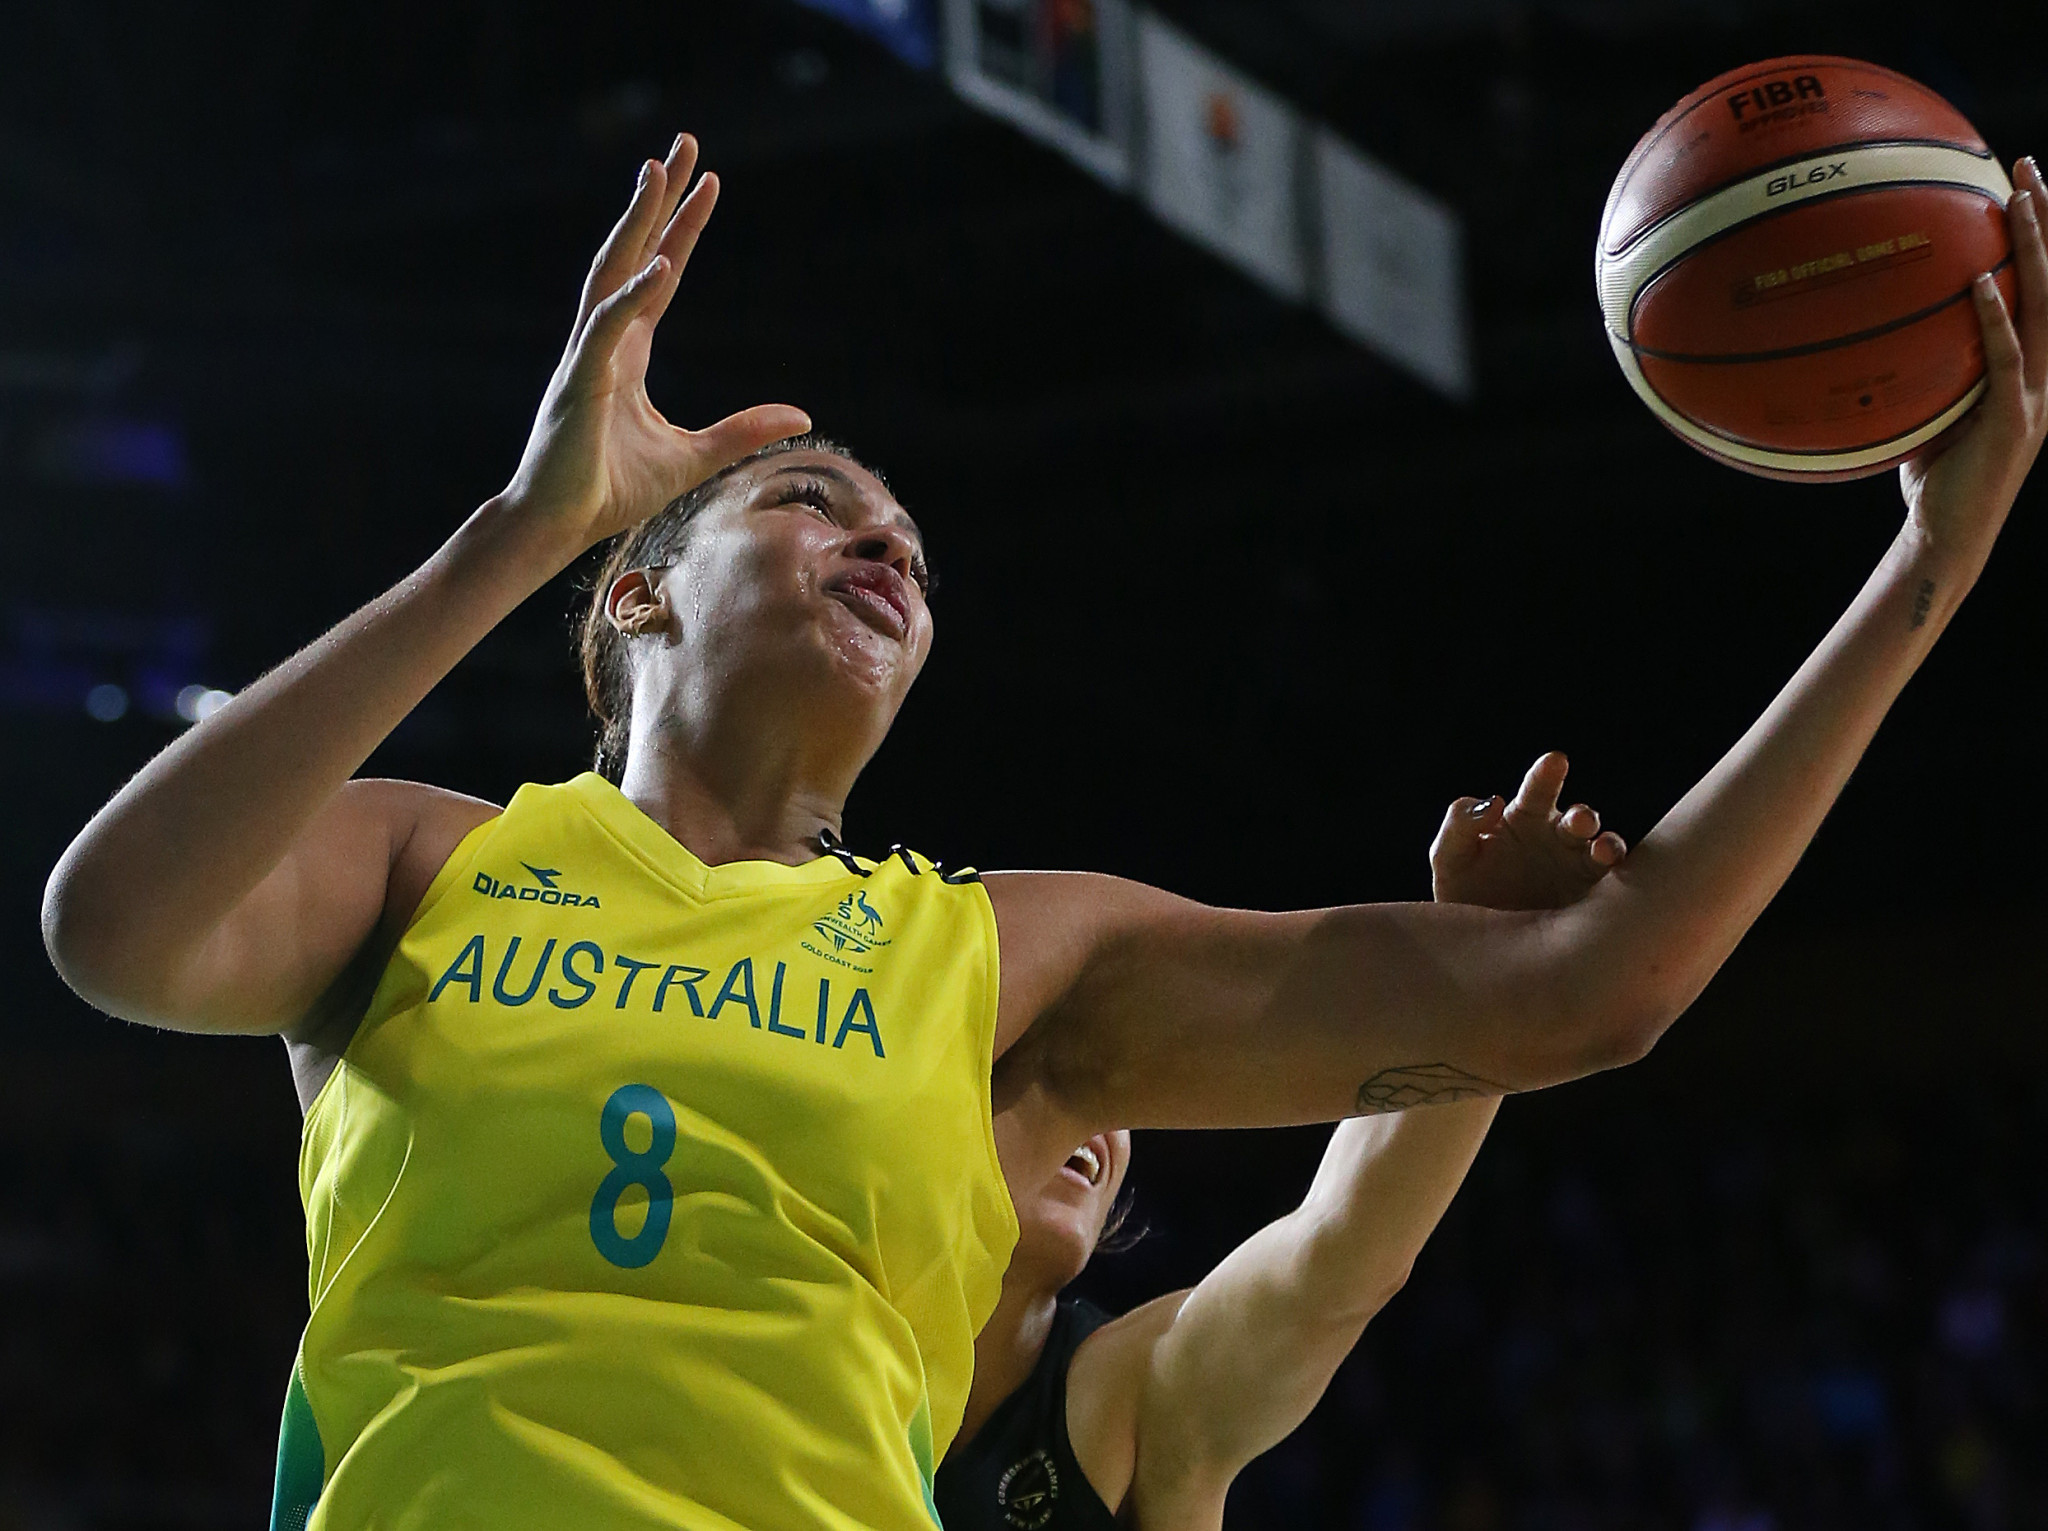 Liz Cambage withdrew from Australia's team for Tokyo 2020 citing mental health issues but is now under investigation for alleged breaches of discipline during a training camp in Las Vegas ©Getty Images